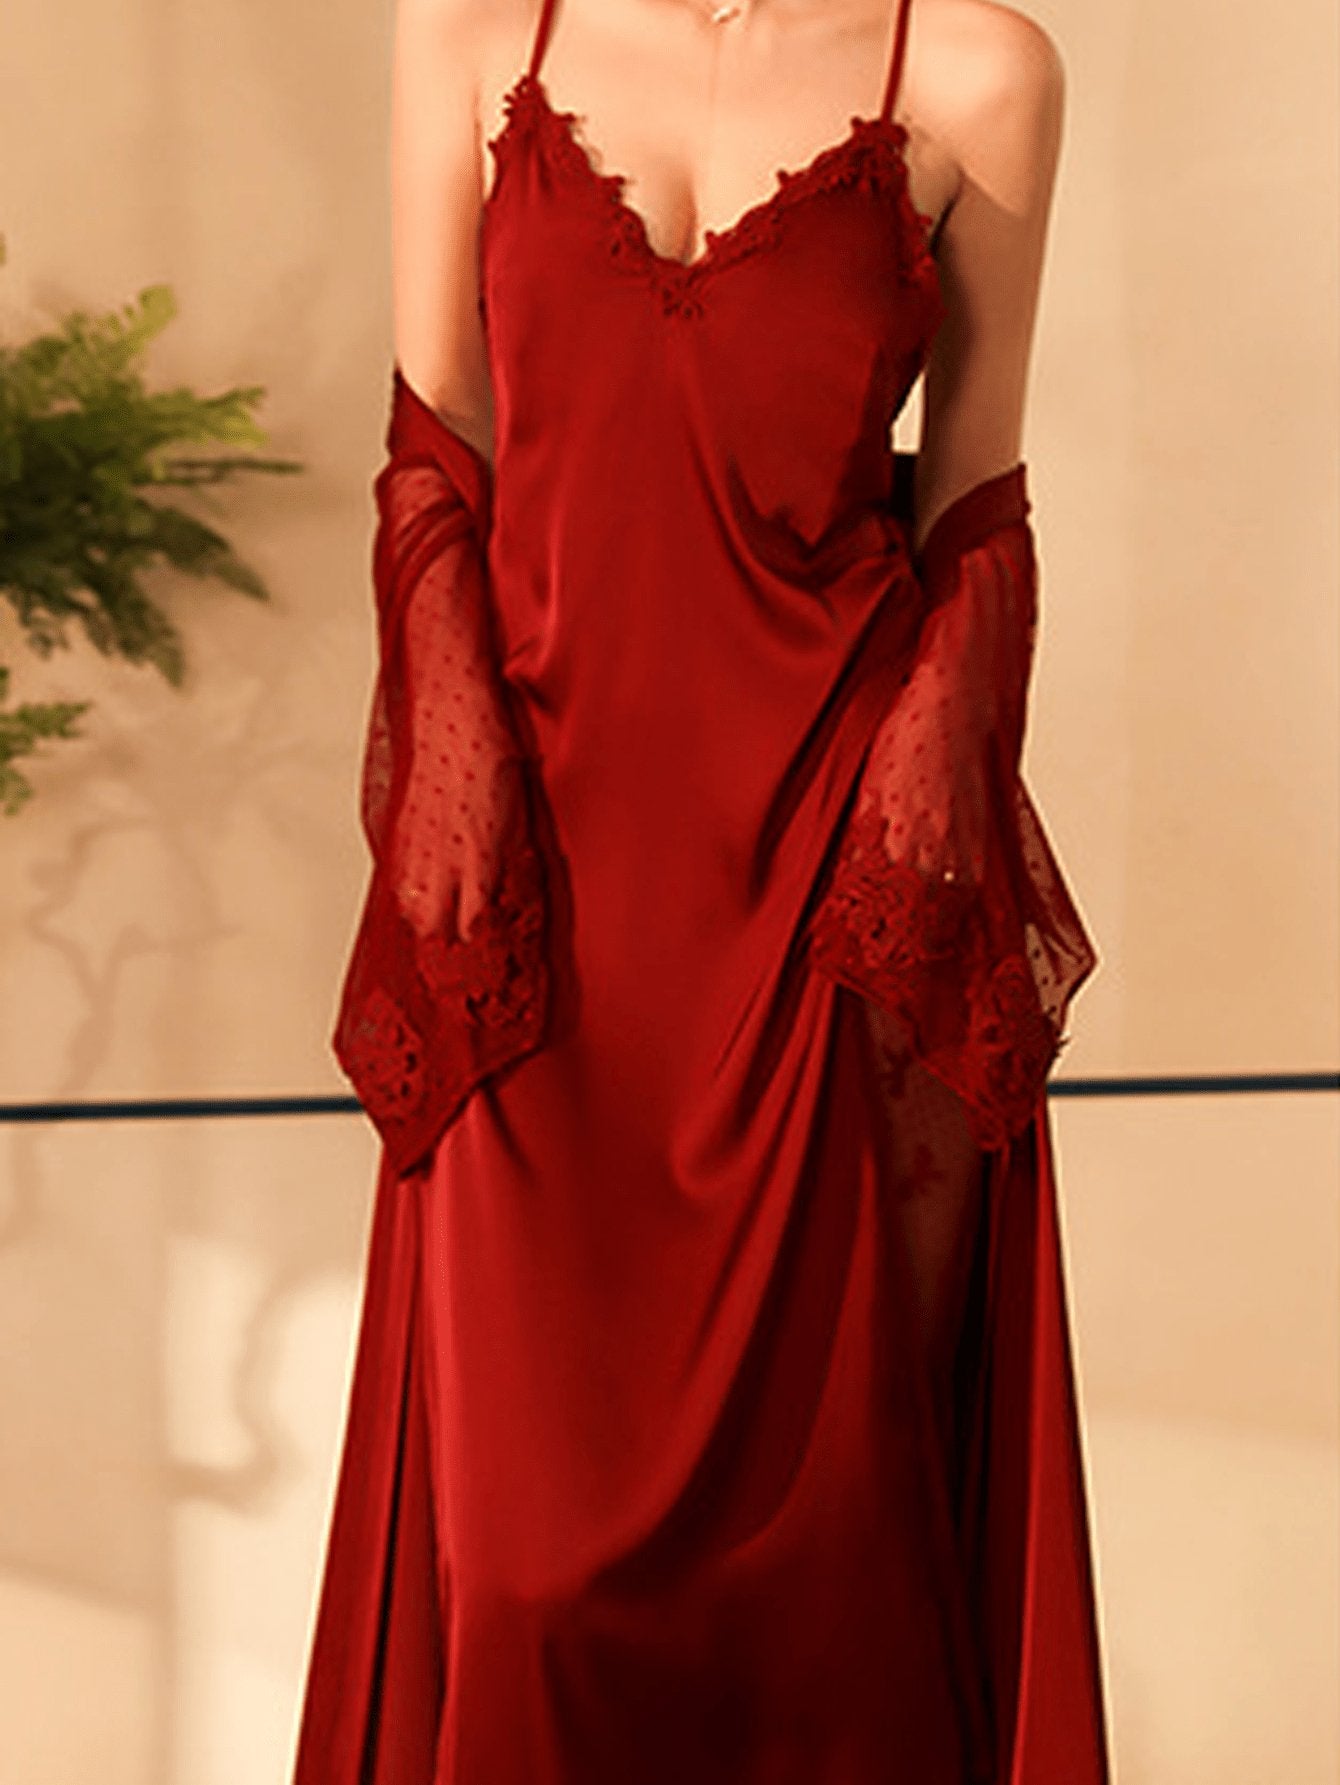 1pc Burgundy Sexy Ice Silk Nightgown, Lengthen Nightdress With Ladies Satin Home Wear Camisole Dress - Negative Apparel